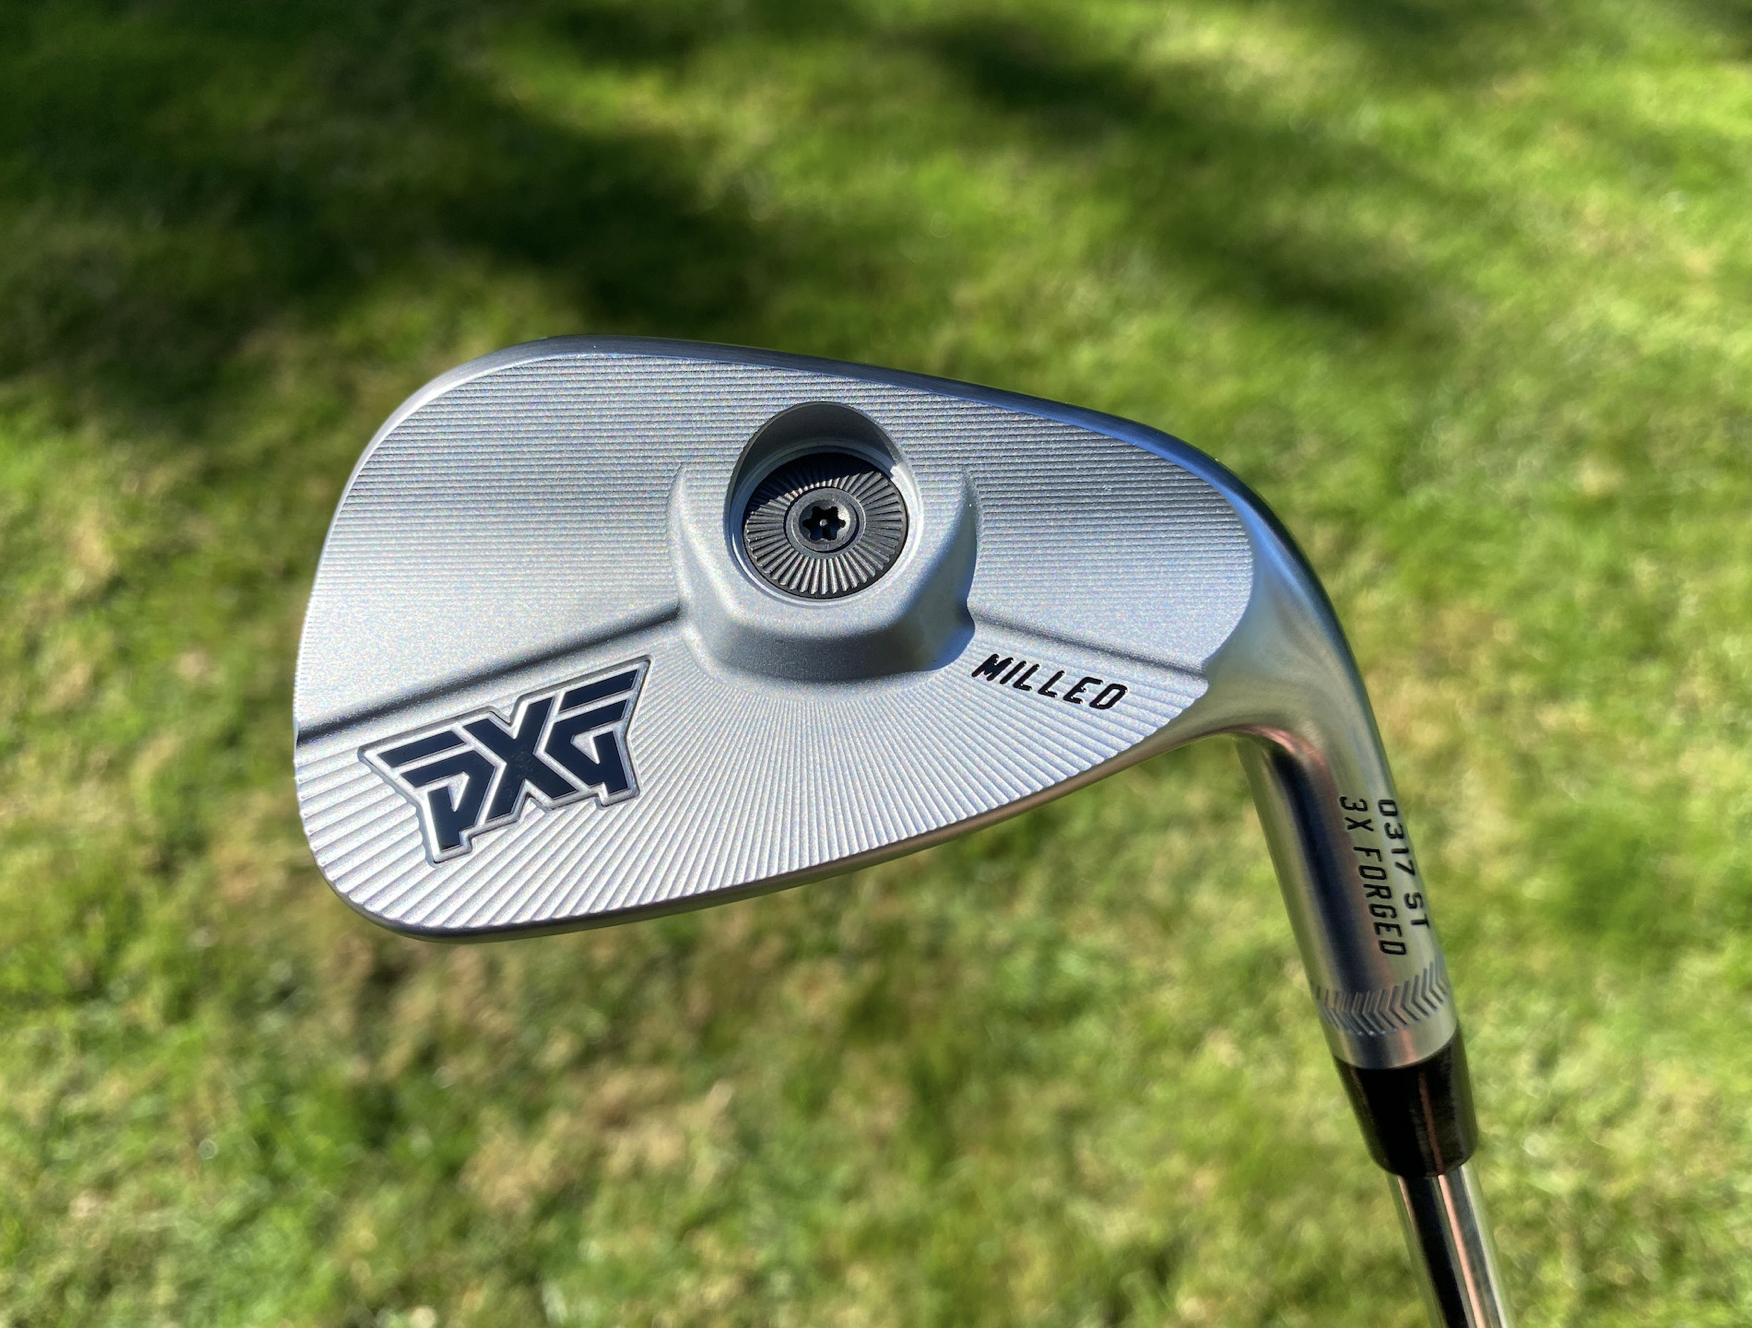 pxg 0317 st irons.